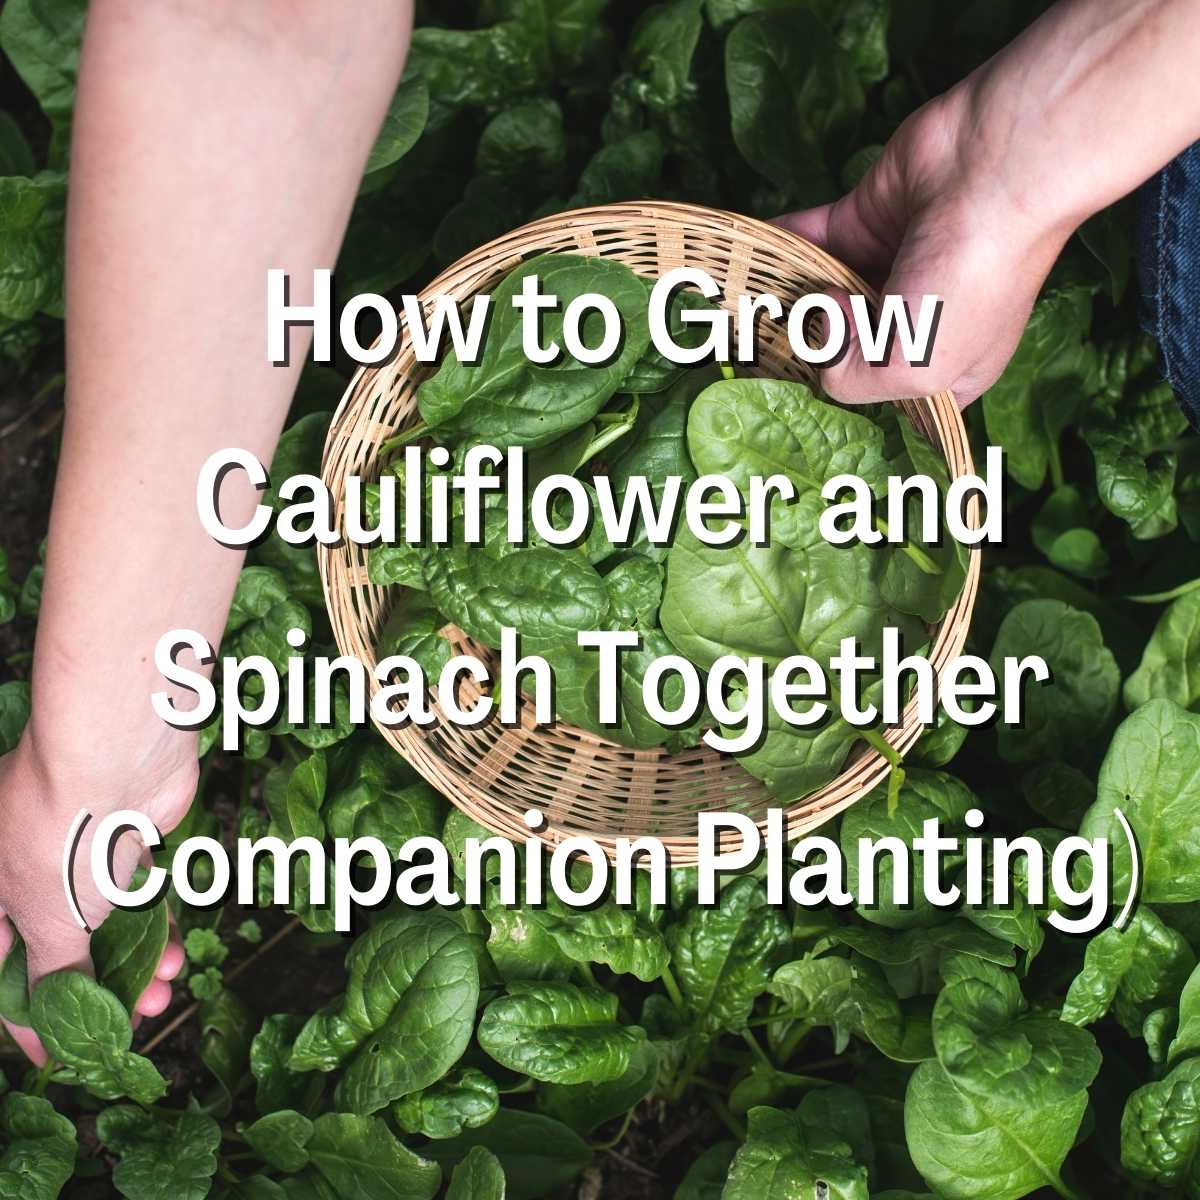 How to Grow Cauliflower and Spinach Together